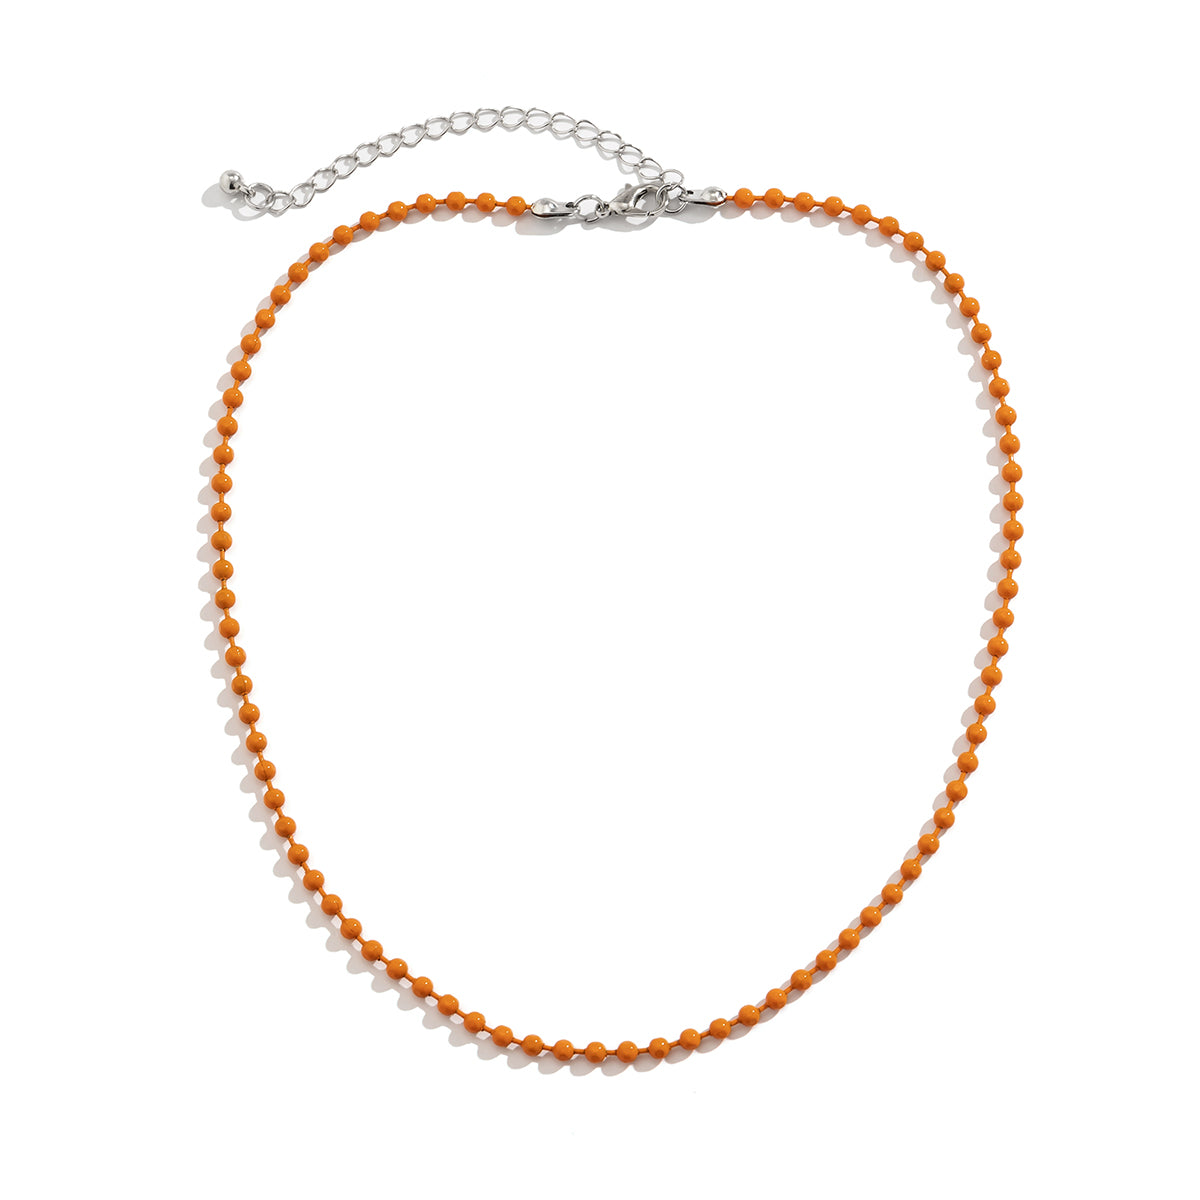 Orange Enamel & Silver-Plated Bead Chain Necklace